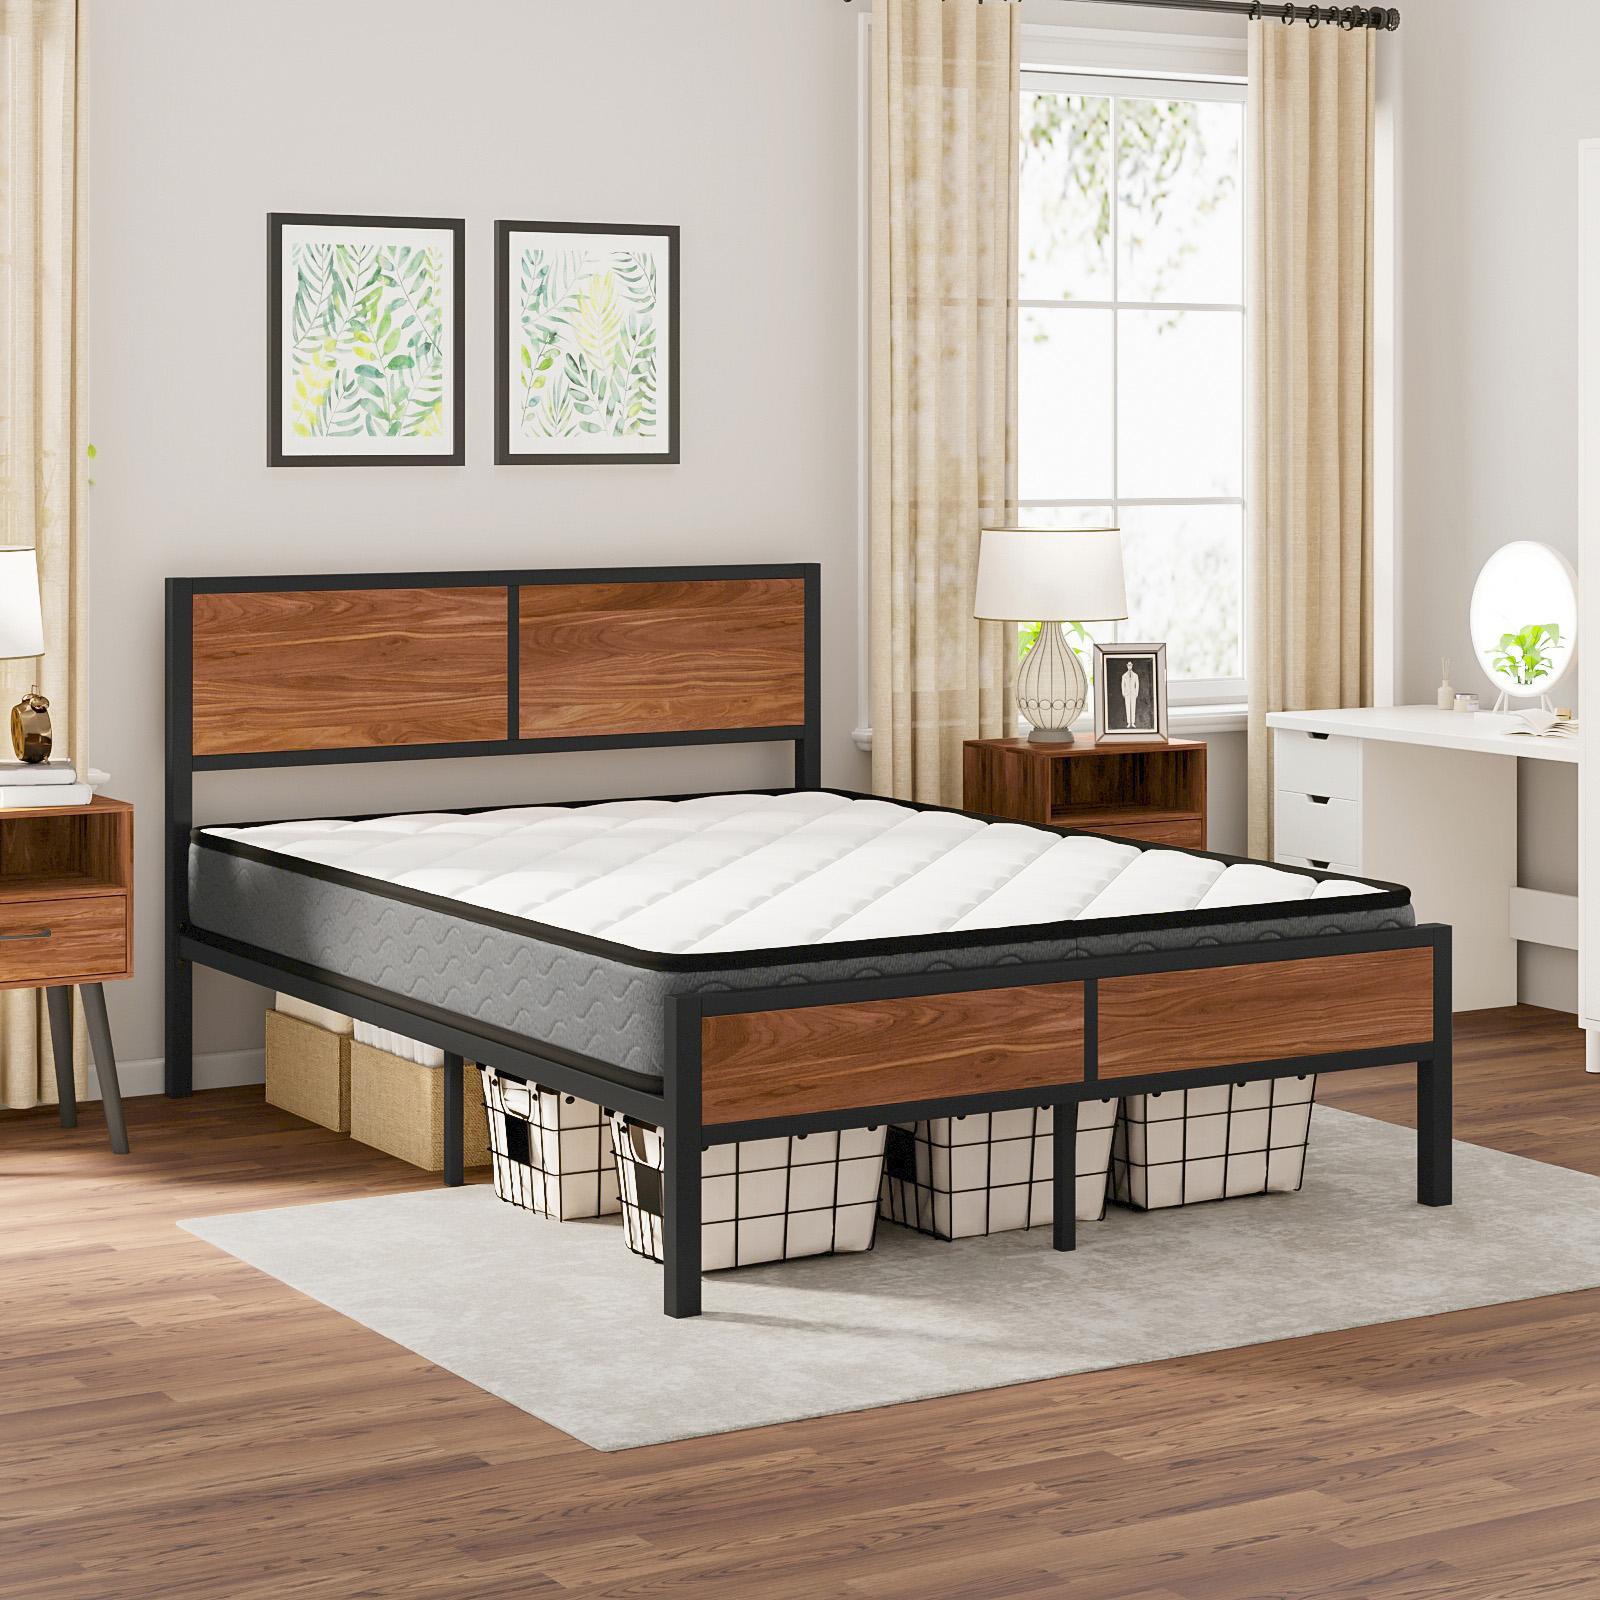 Advwin Queen Metal and Wood Bed Frame w/ Headboard, Walnut